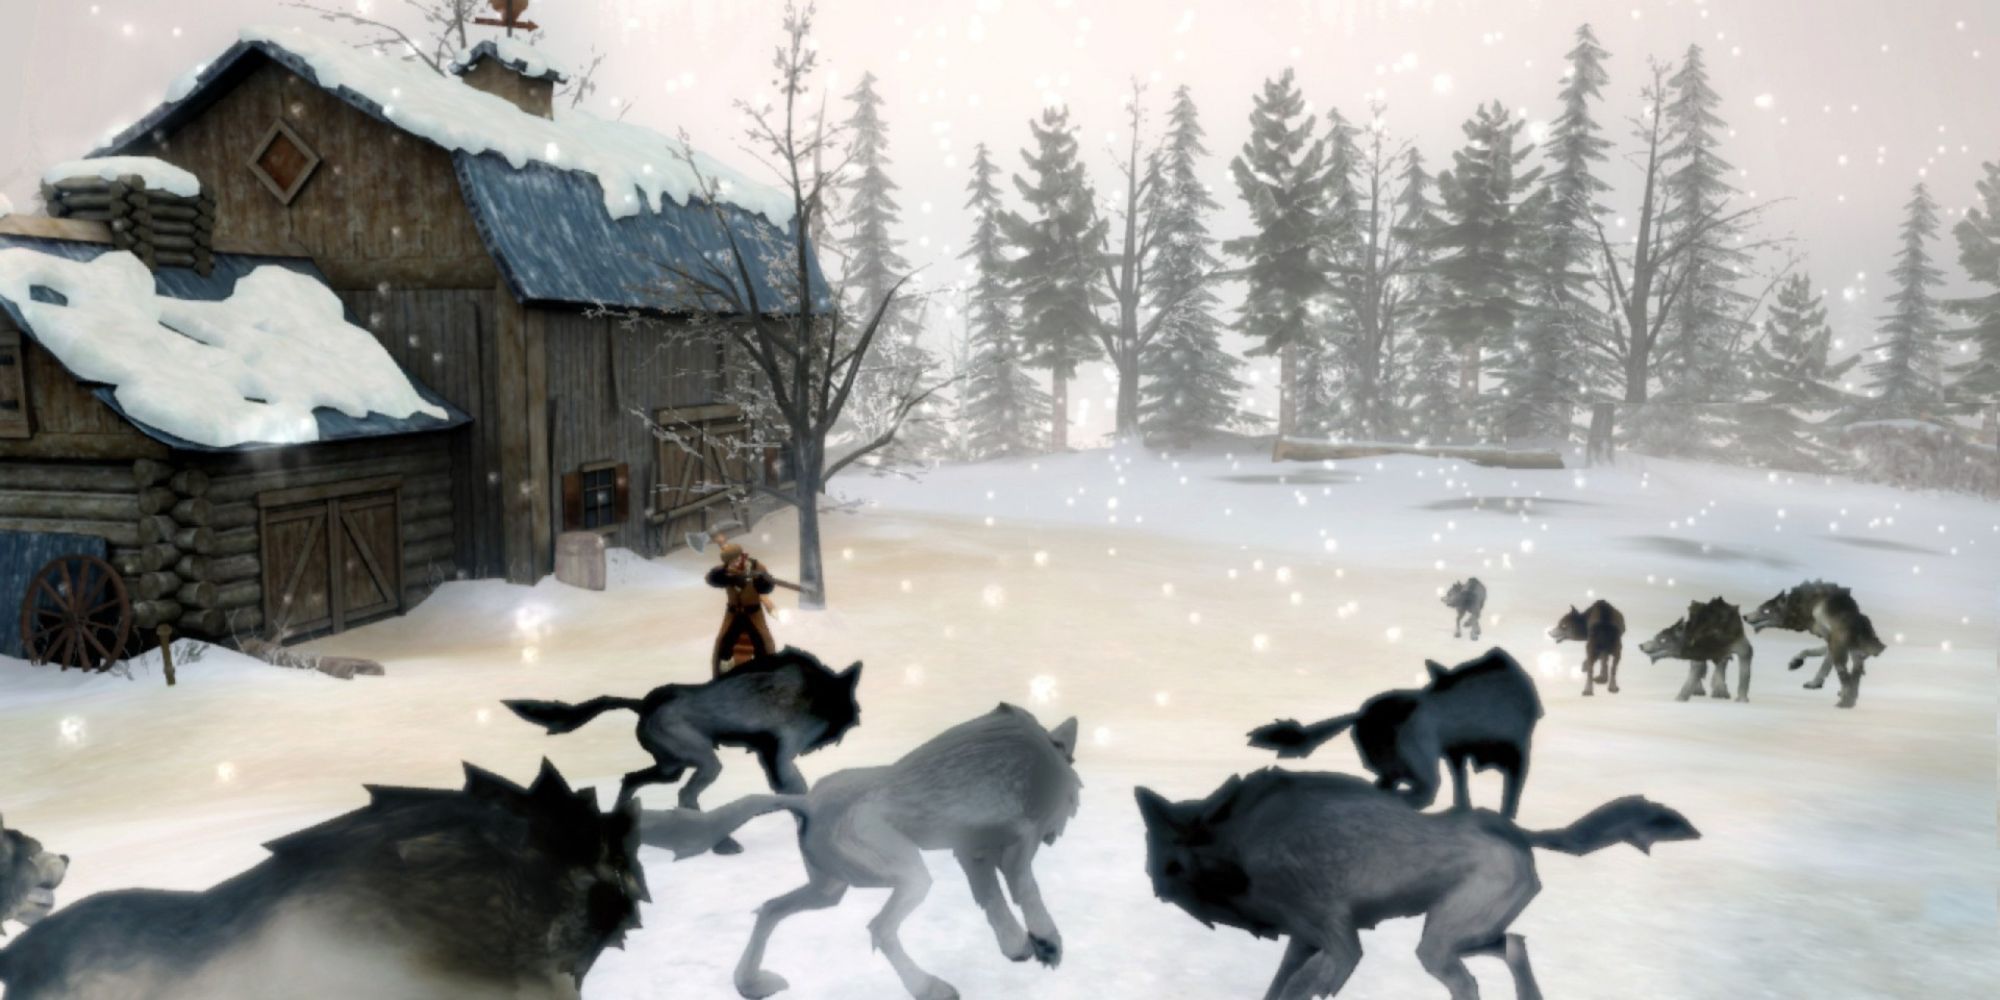 Sang-Froid - Tales of Werewolves gameplay wolves in icy wilderness with cabin